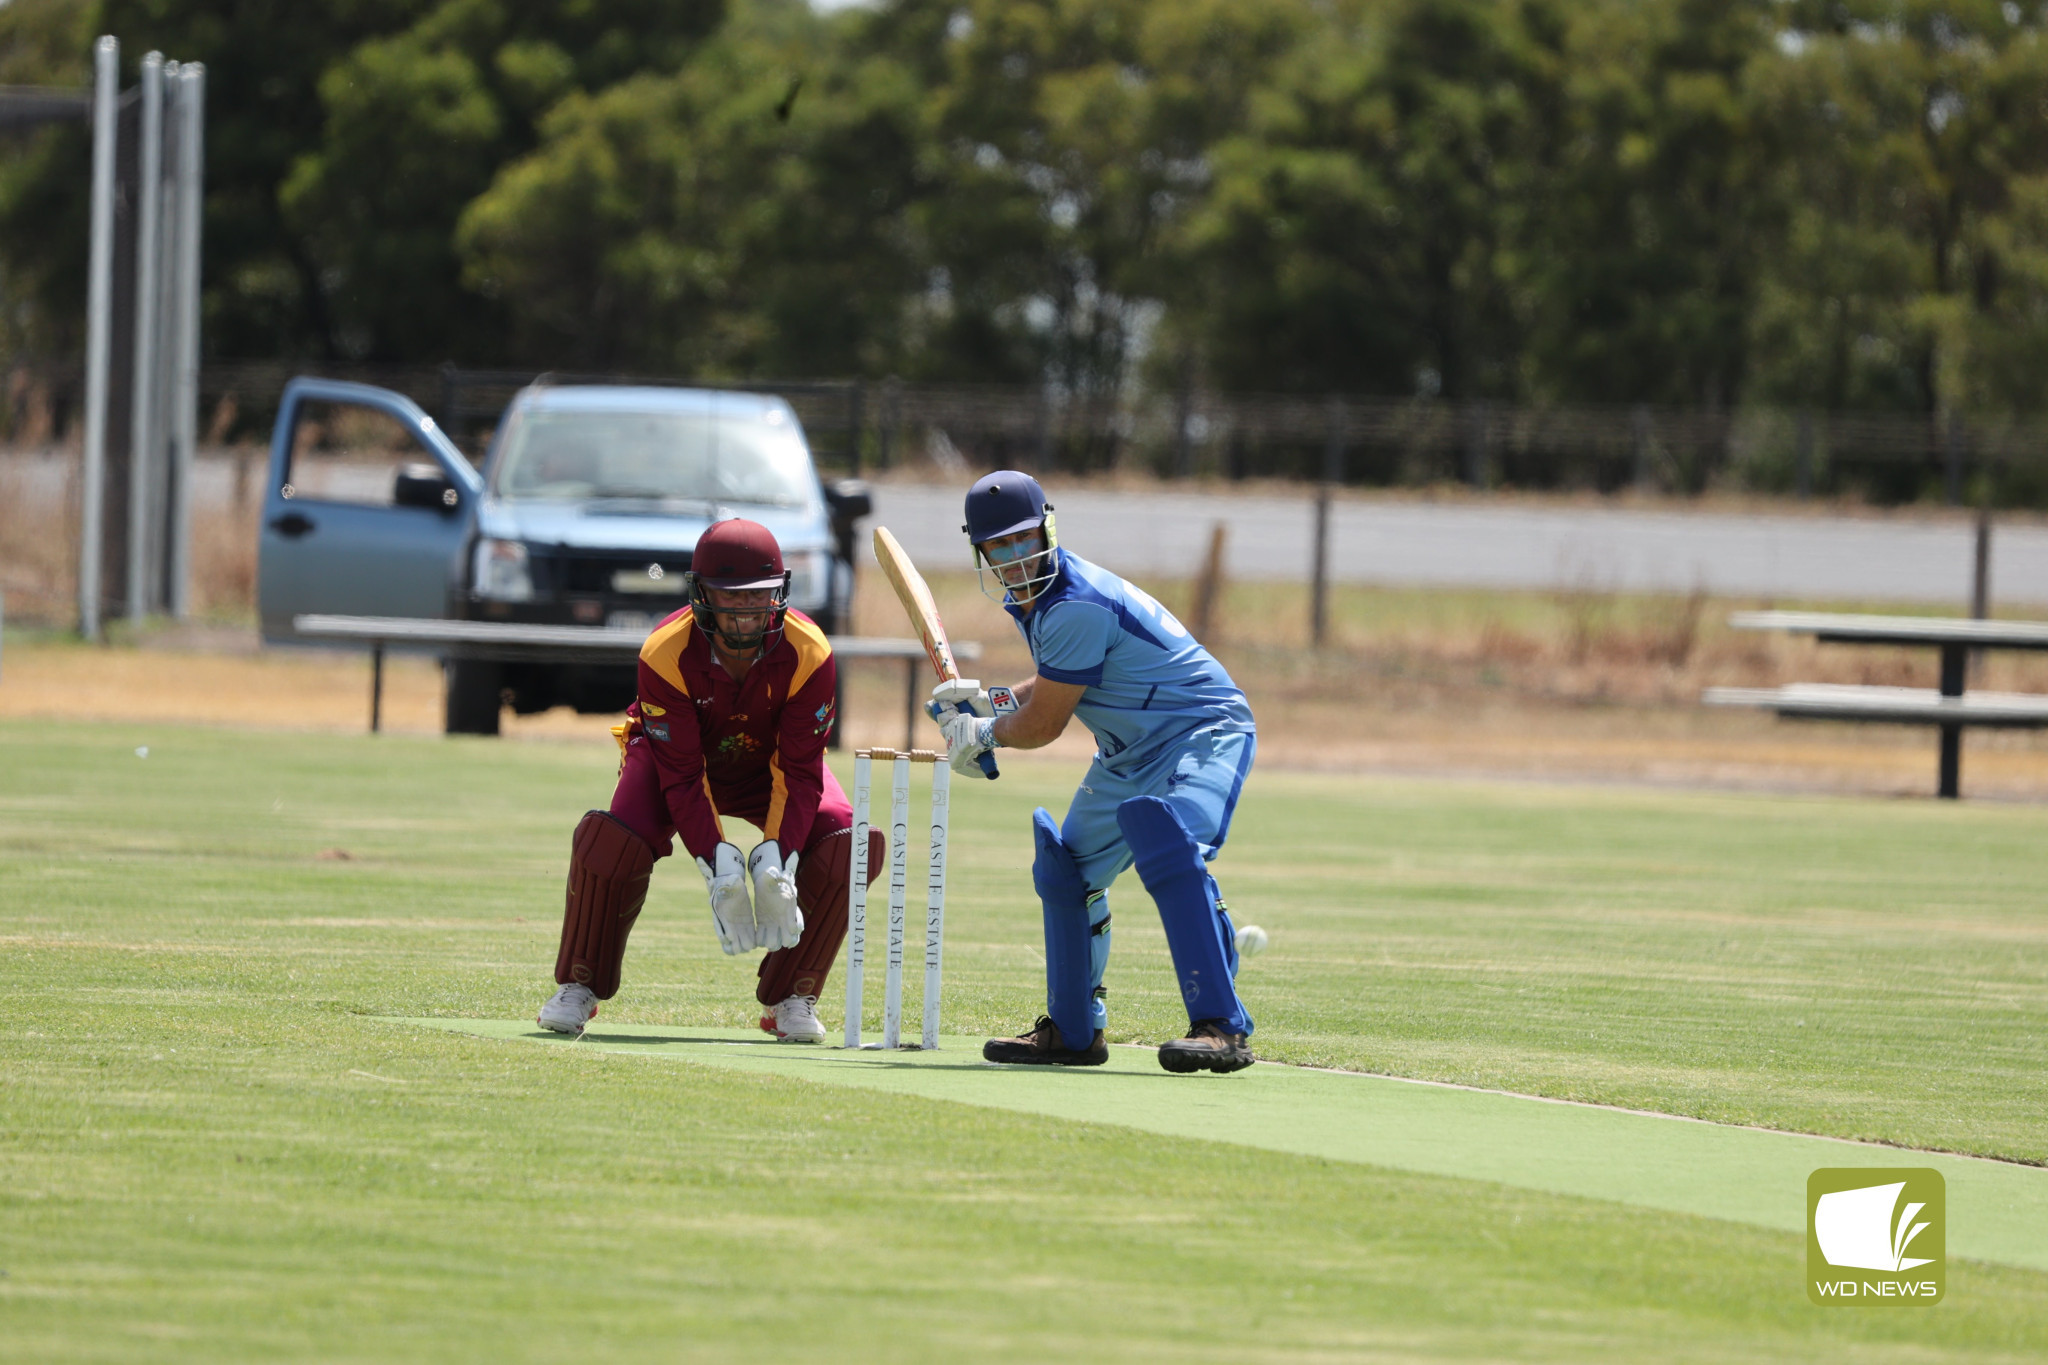 Local Cricket Action - feature photo